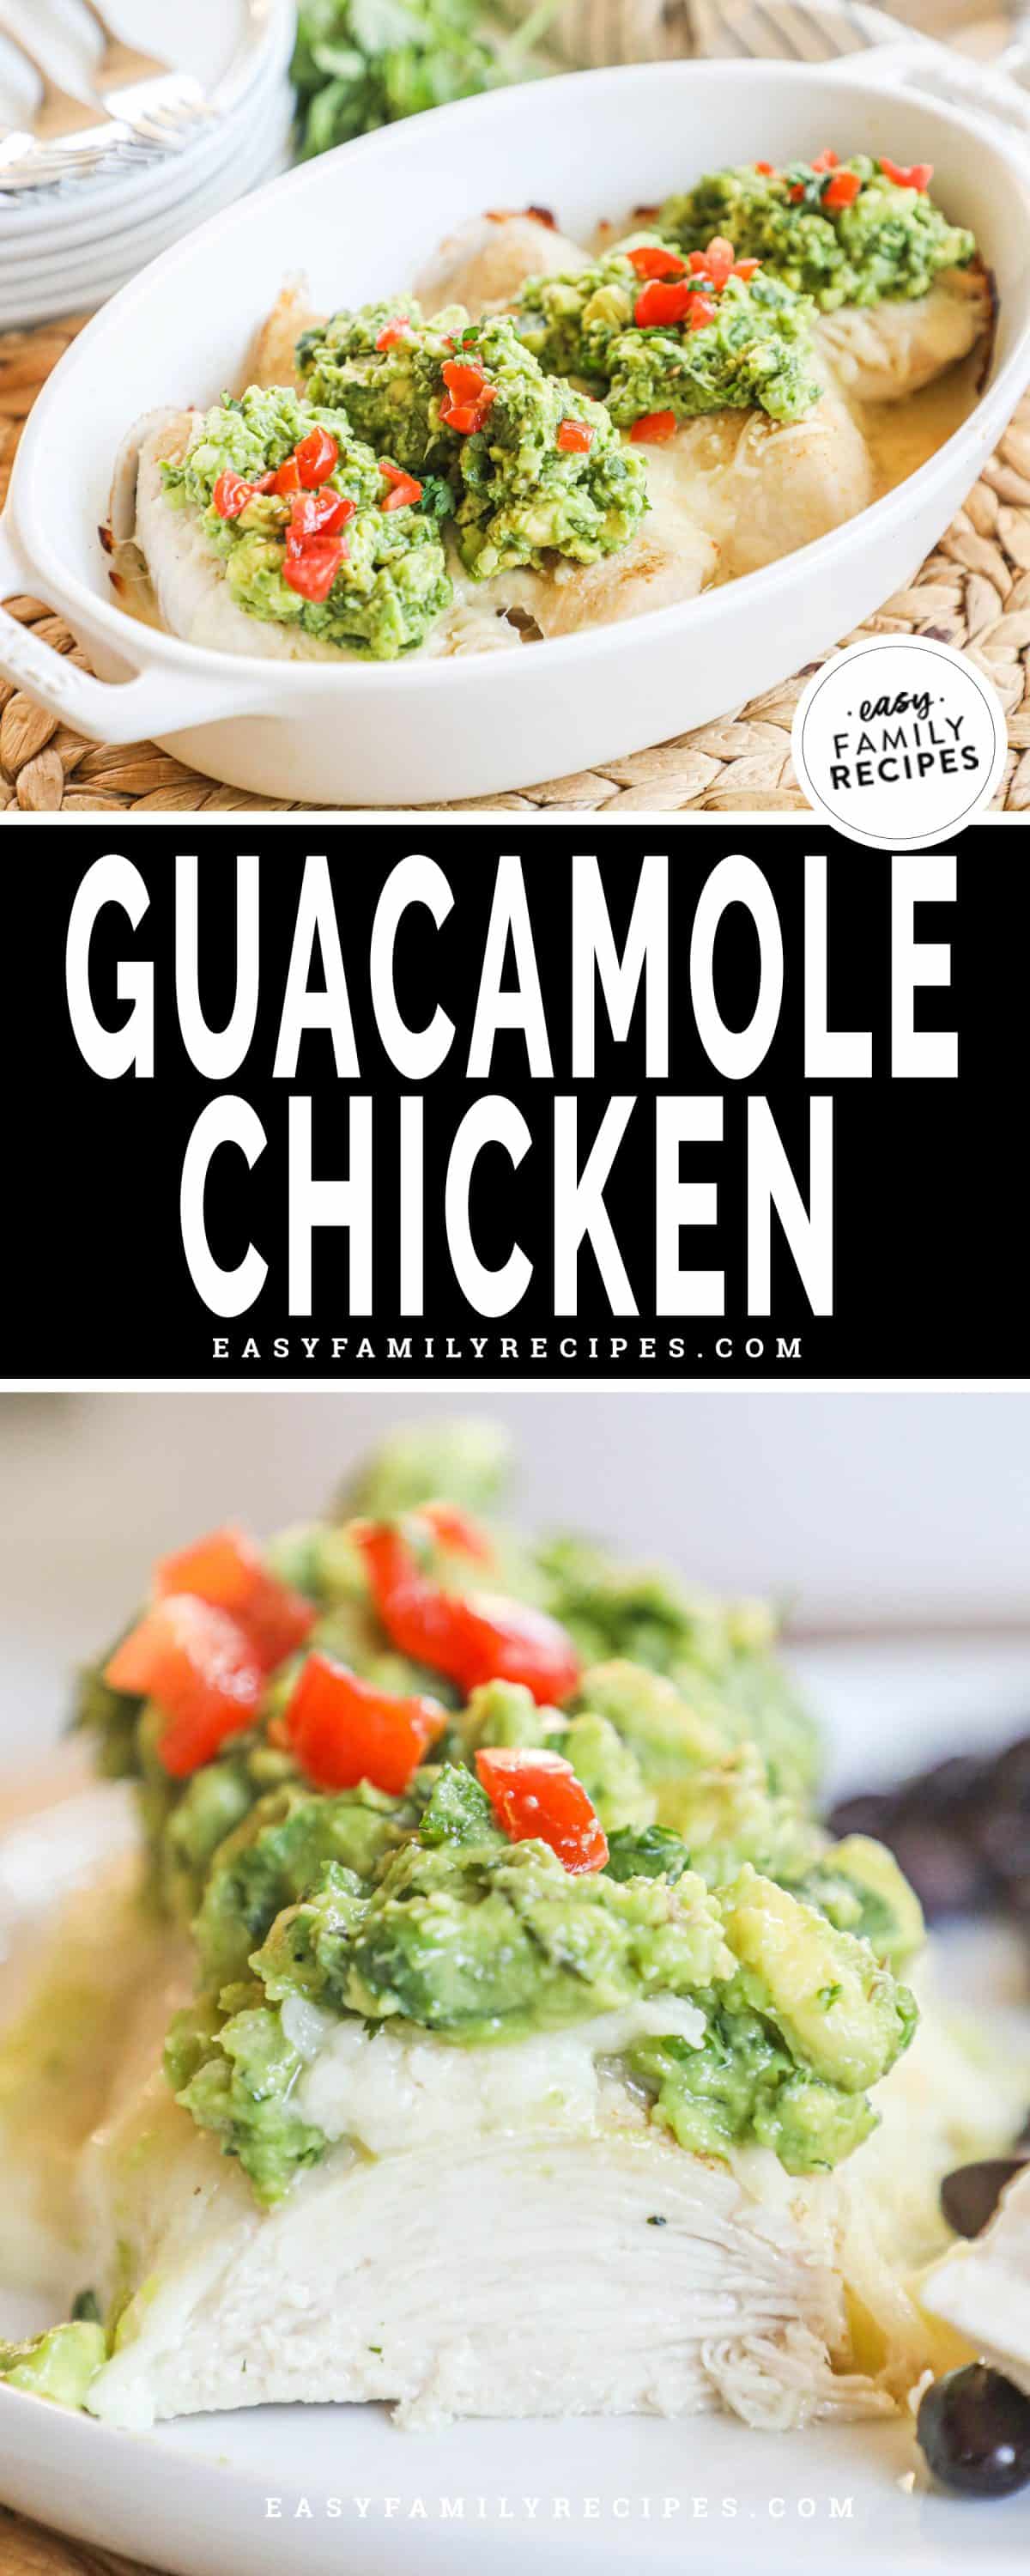 Image collage with one photo of the chicken and guacamole in a baking dish and another image on the chicken cut open showing the juicy inside.